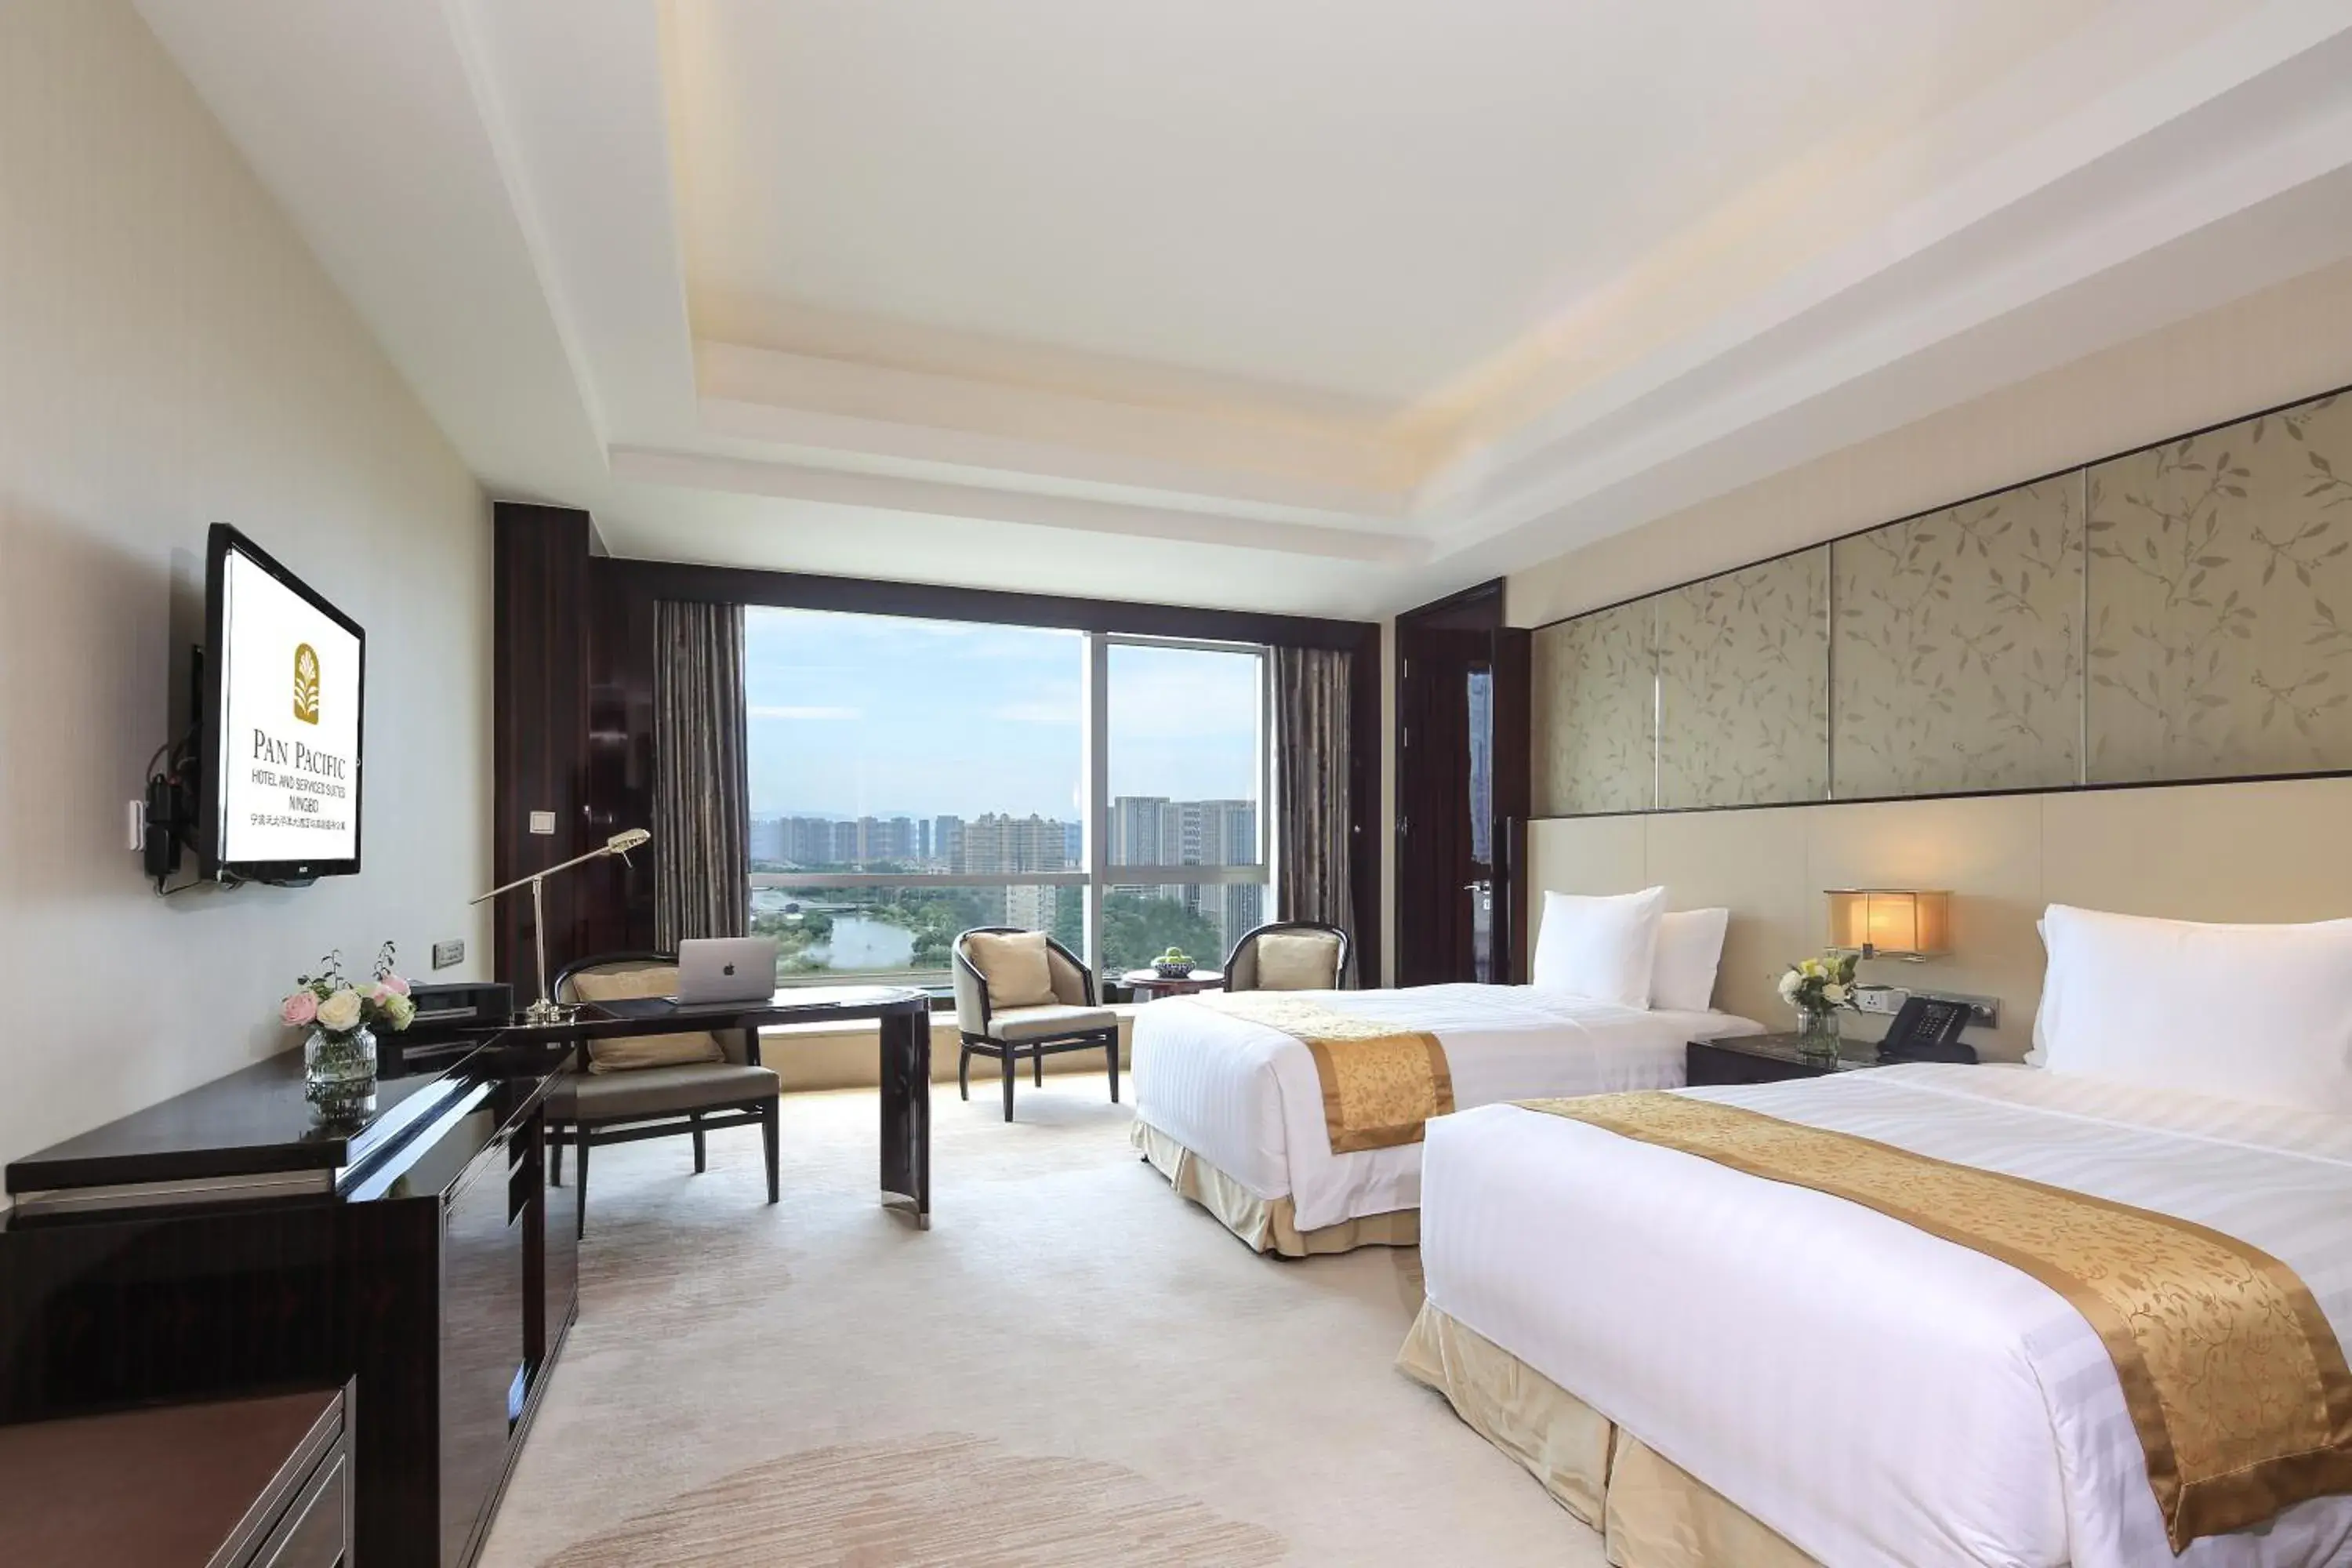 Photo of the whole room in Pan Pacific Ningbo